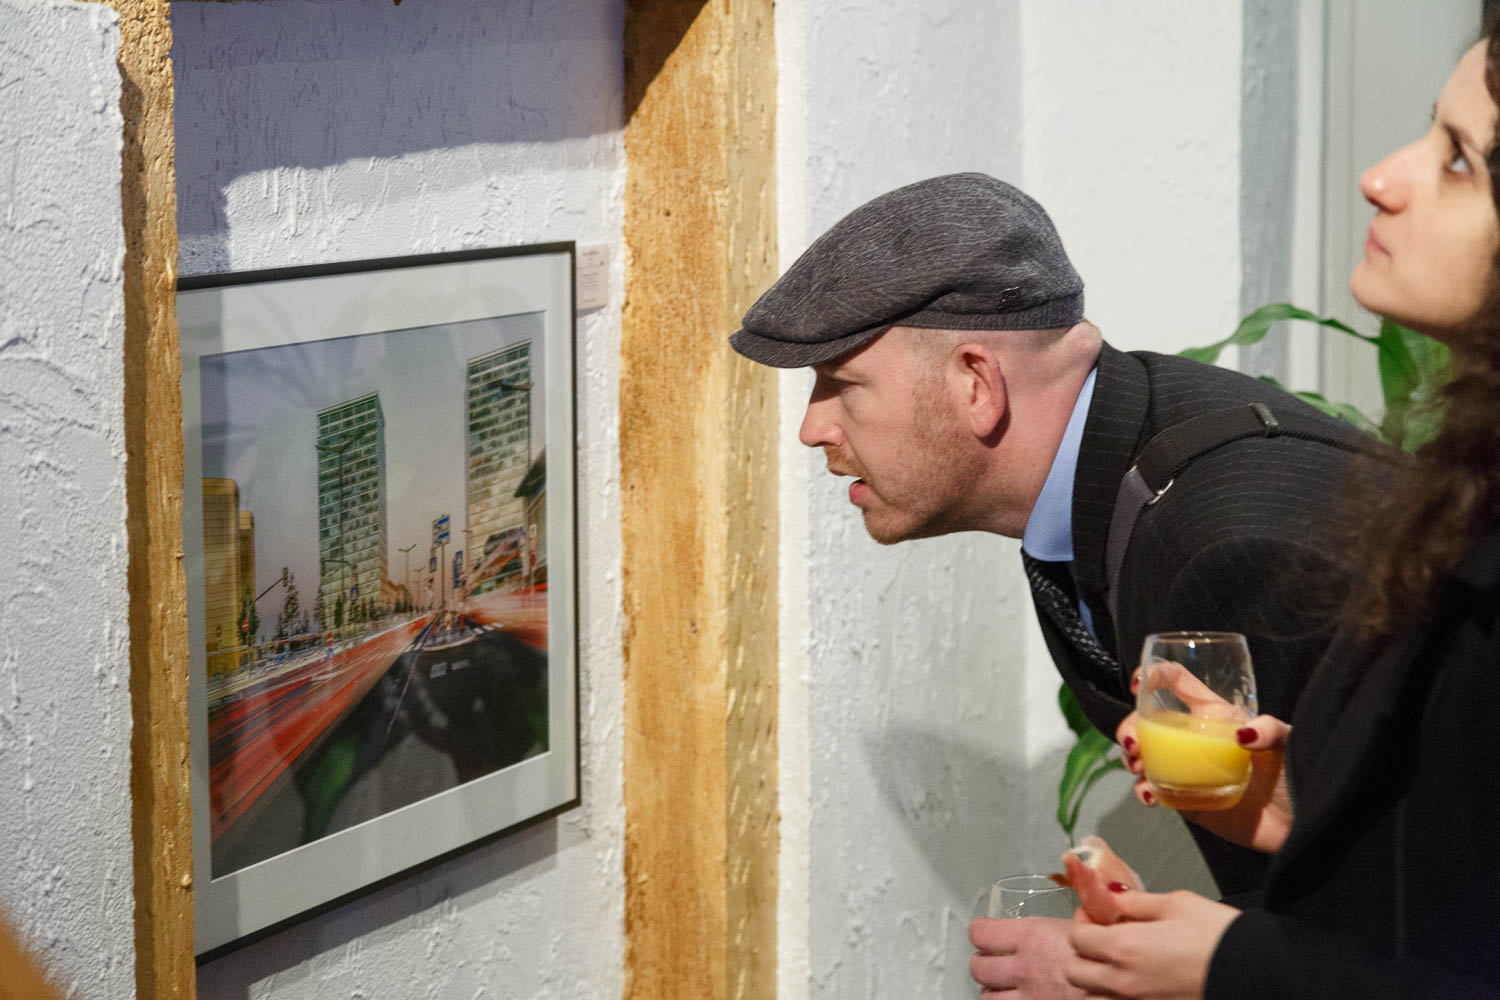 First solo exhibition by Luxembourg Landscape Photographer Christophe Van Biesen at the Brasserie Beim Siggy in Luxembourg City